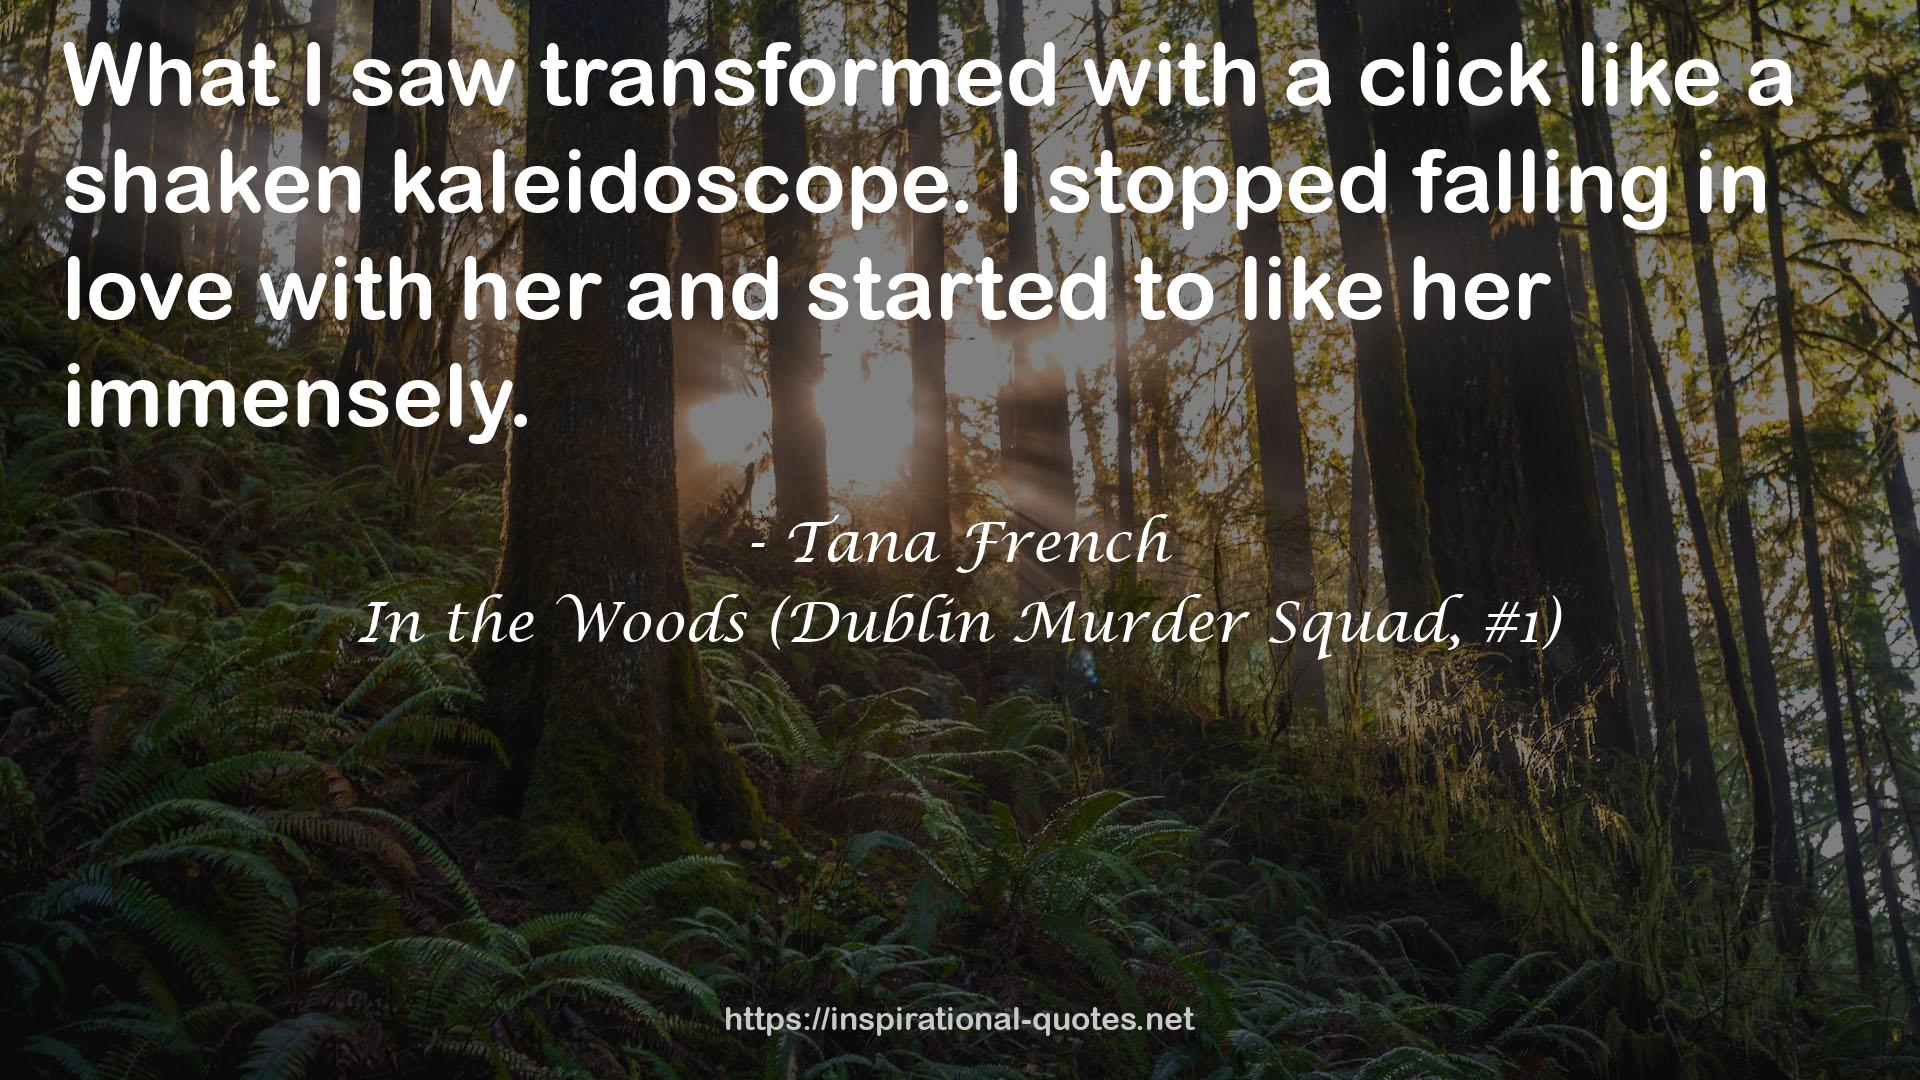 In the Woods (Dublin Murder Squad, #1) QUOTES